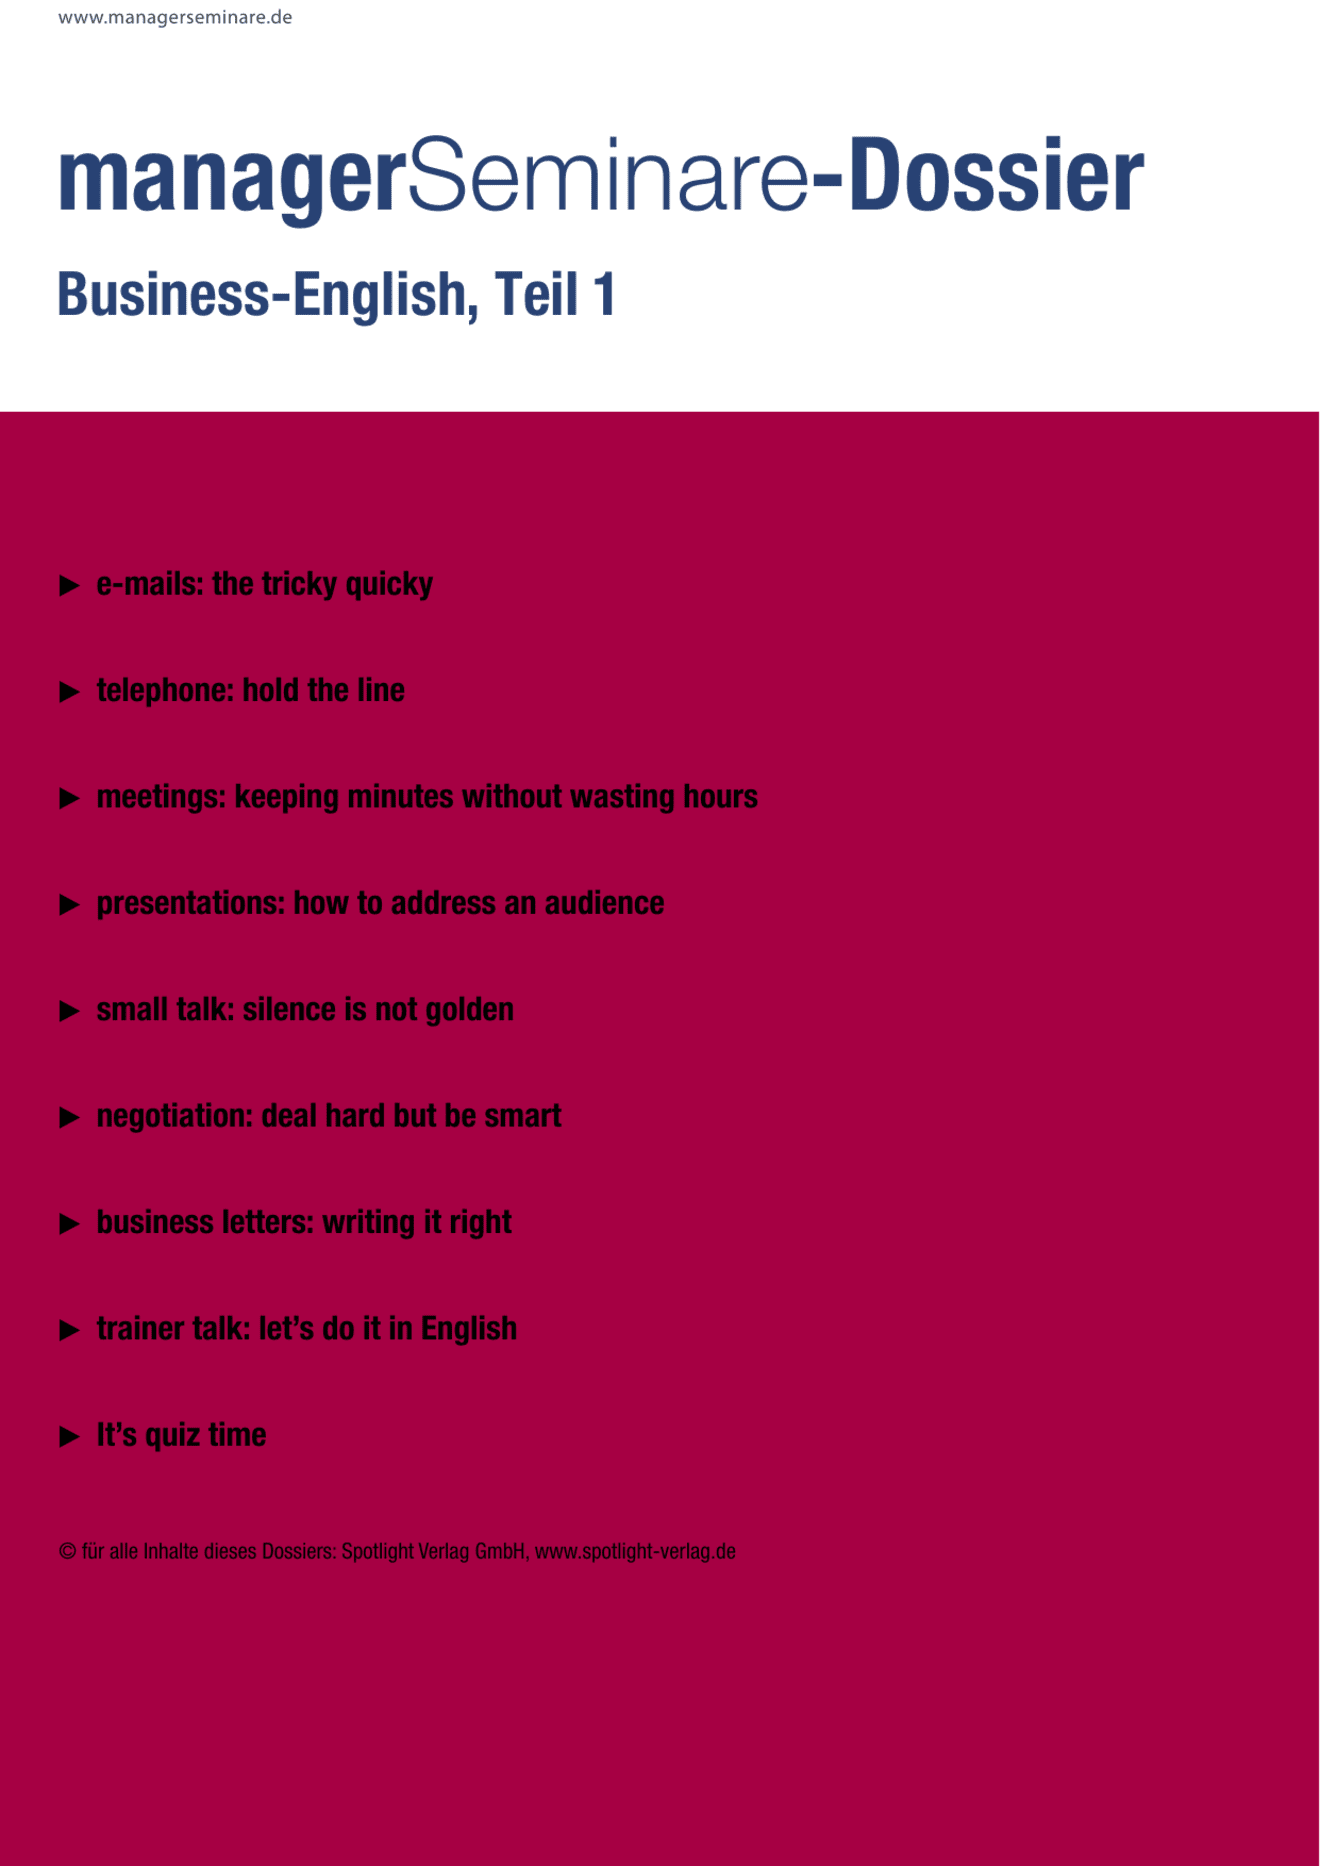 Dossier Business-English, Teil 1